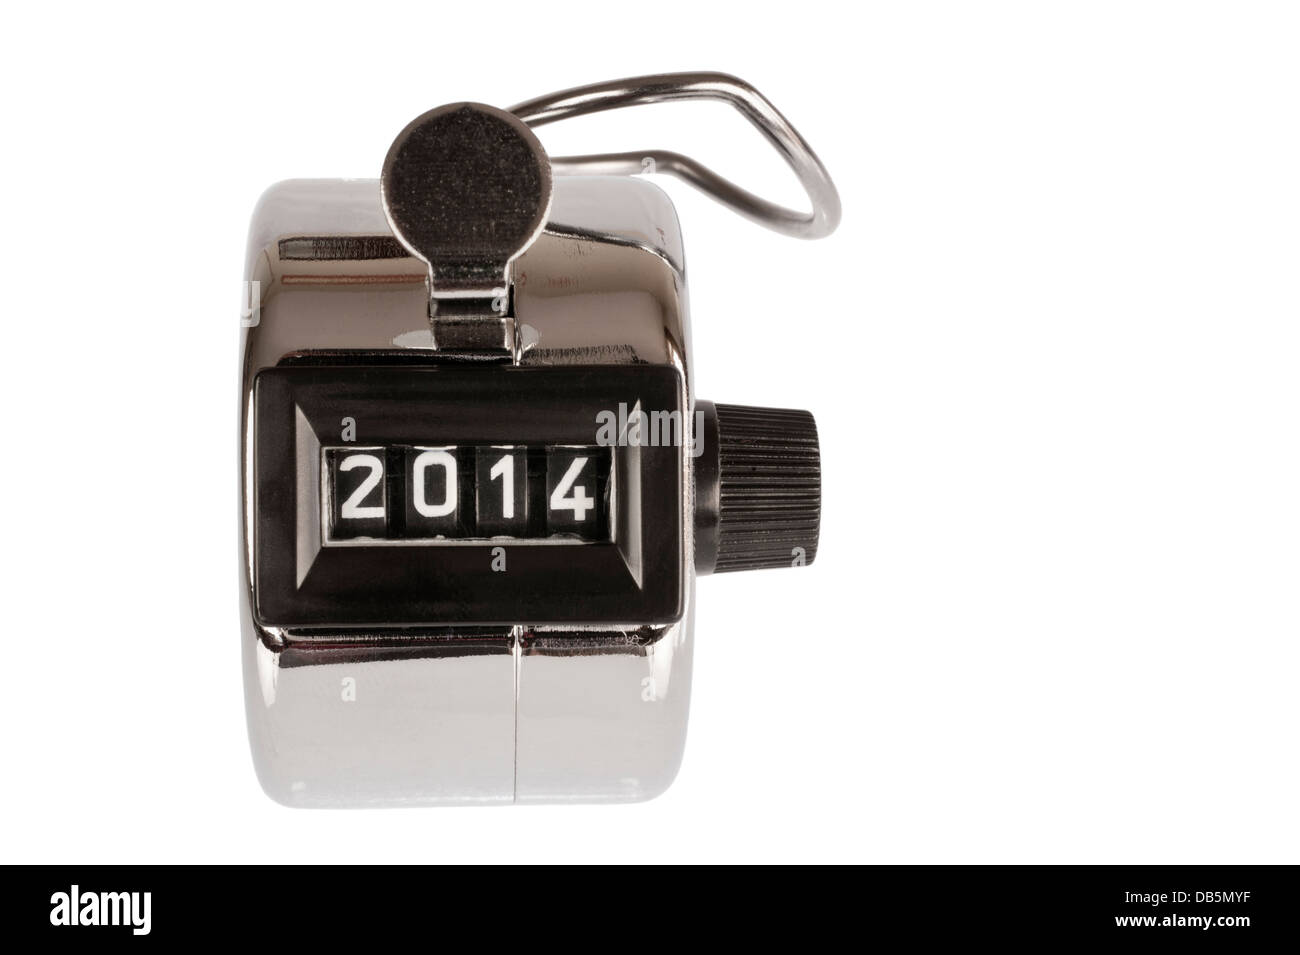 Chrome analog pedometer with is counter set at the year 2014 Stock Photo